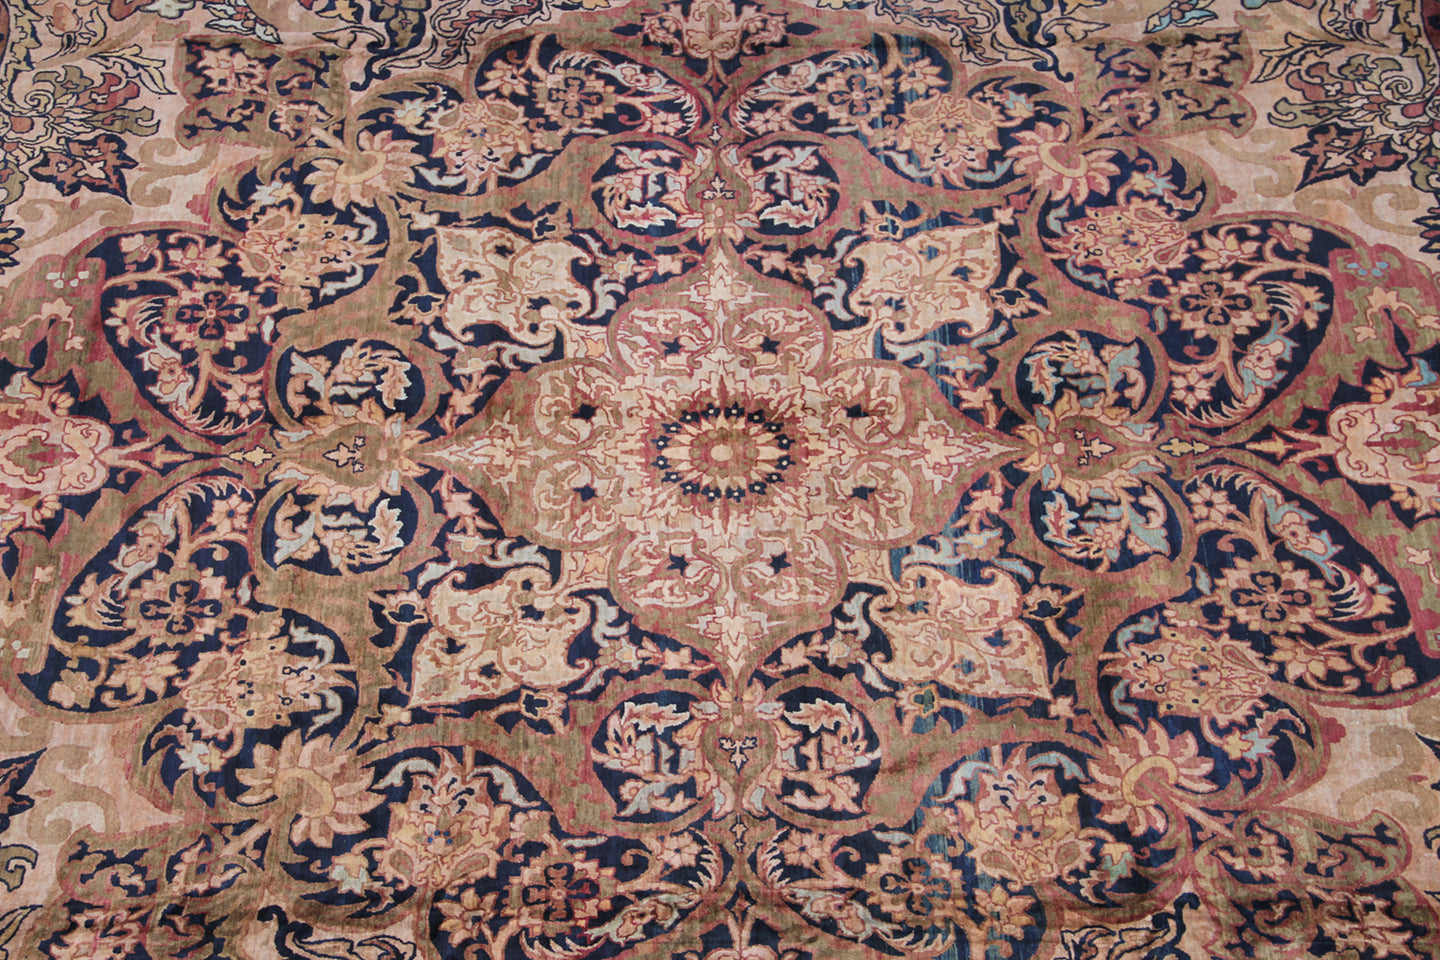 20'x24' Perfect Condition Signed Antique Persian Kermanshah Palace Rug